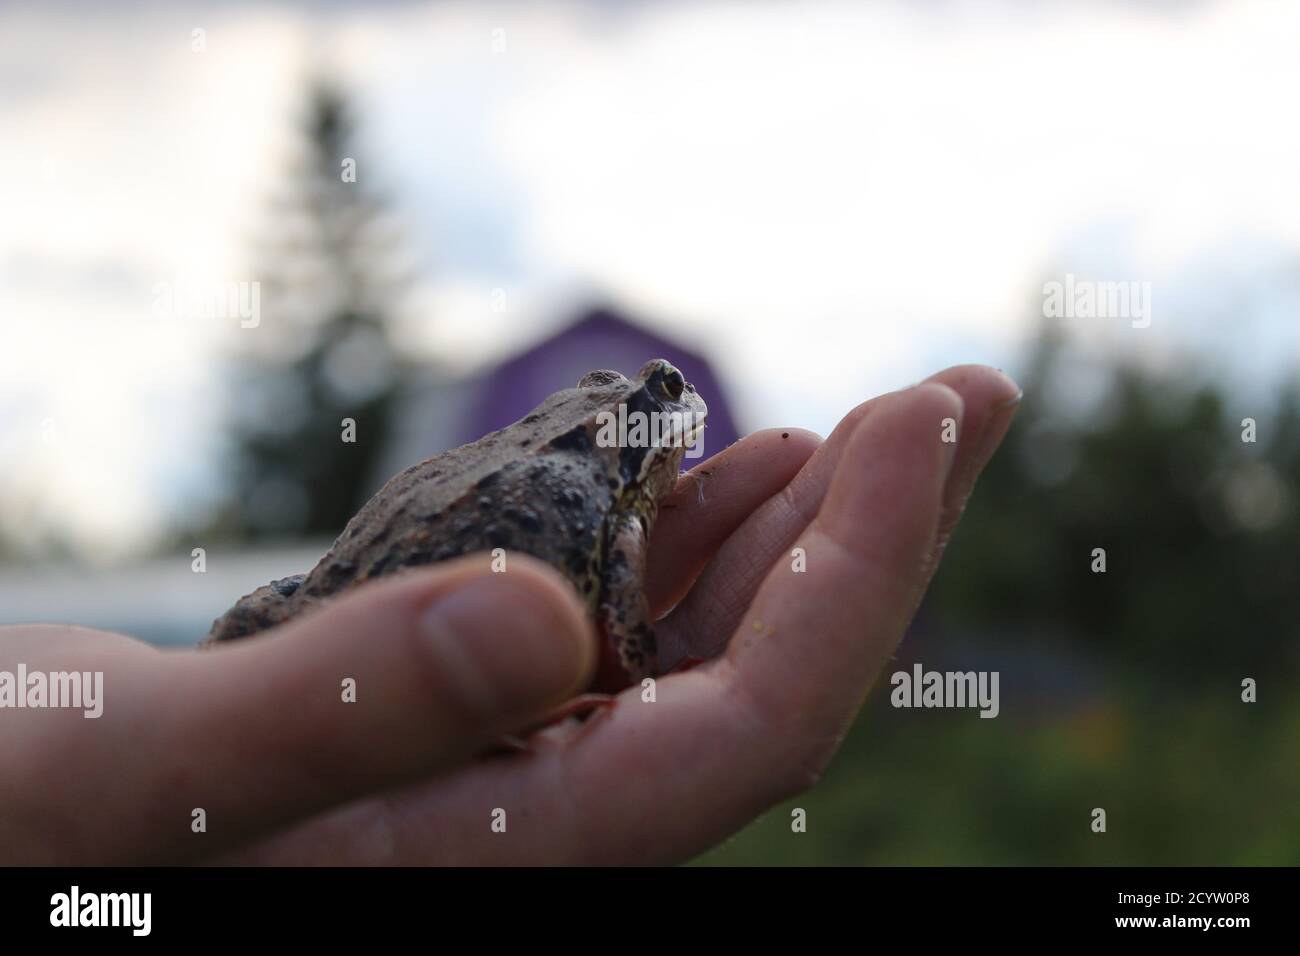 Frog sitting on the hand looking into the distance with background blurring Stock Photo